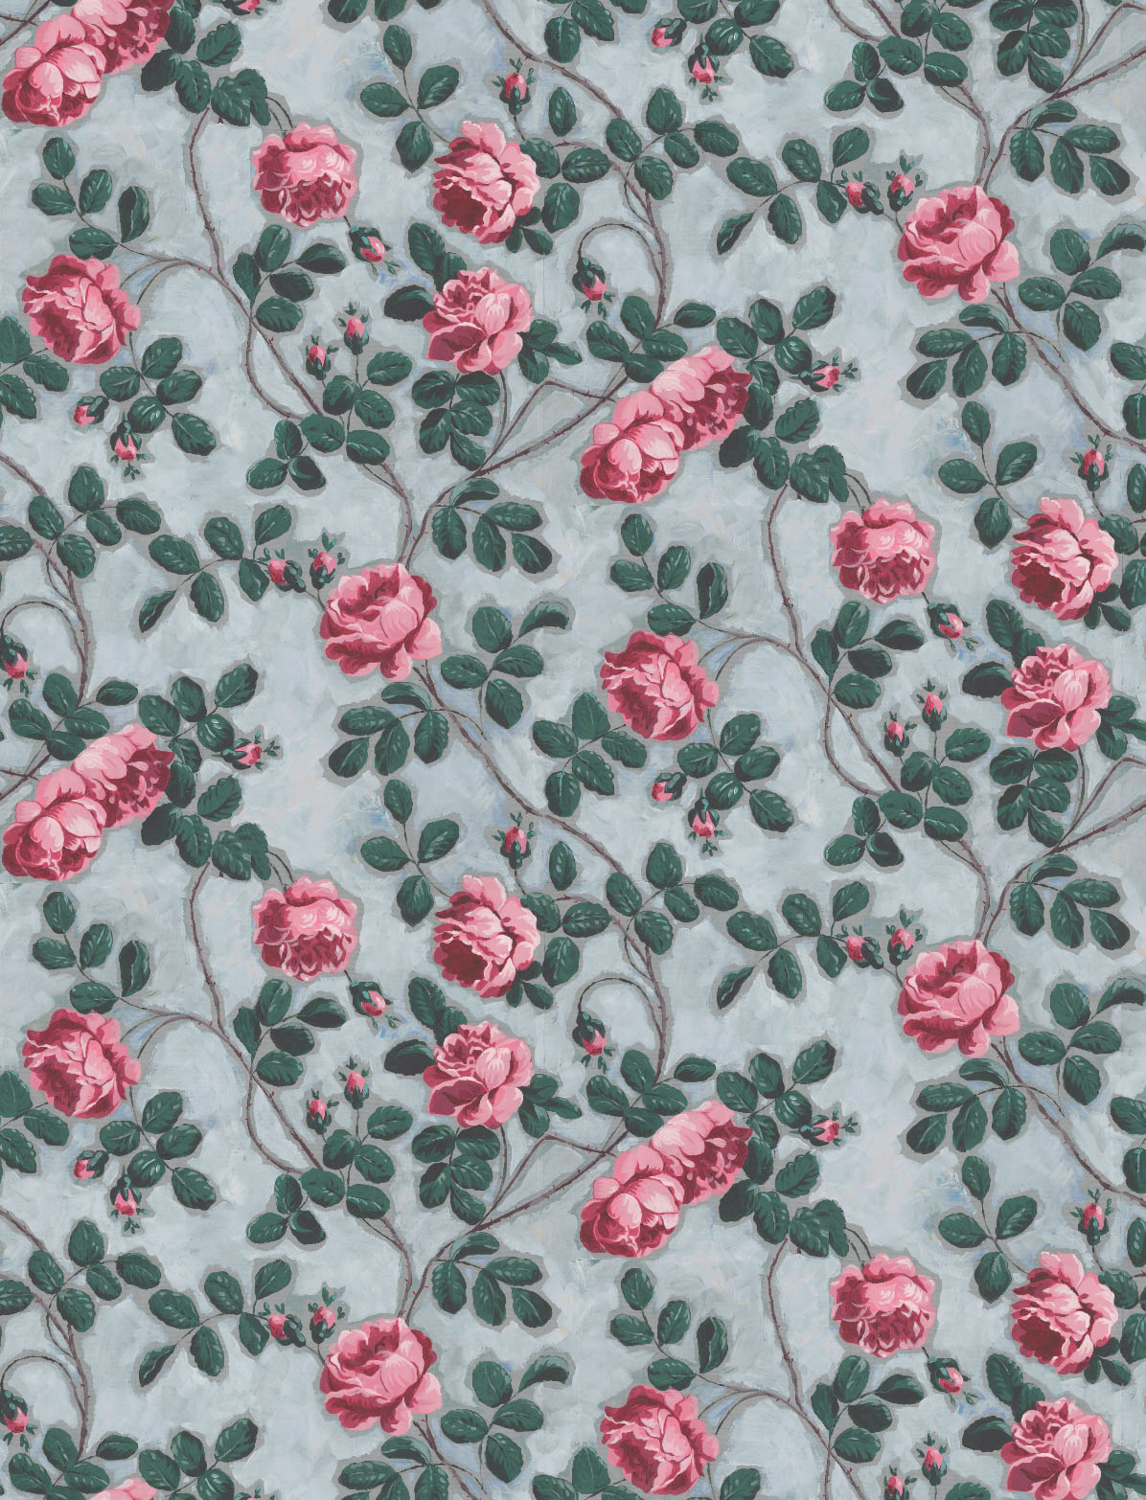 blue wallpaper patterned with quilted roses, suggested by Natasja Sadi